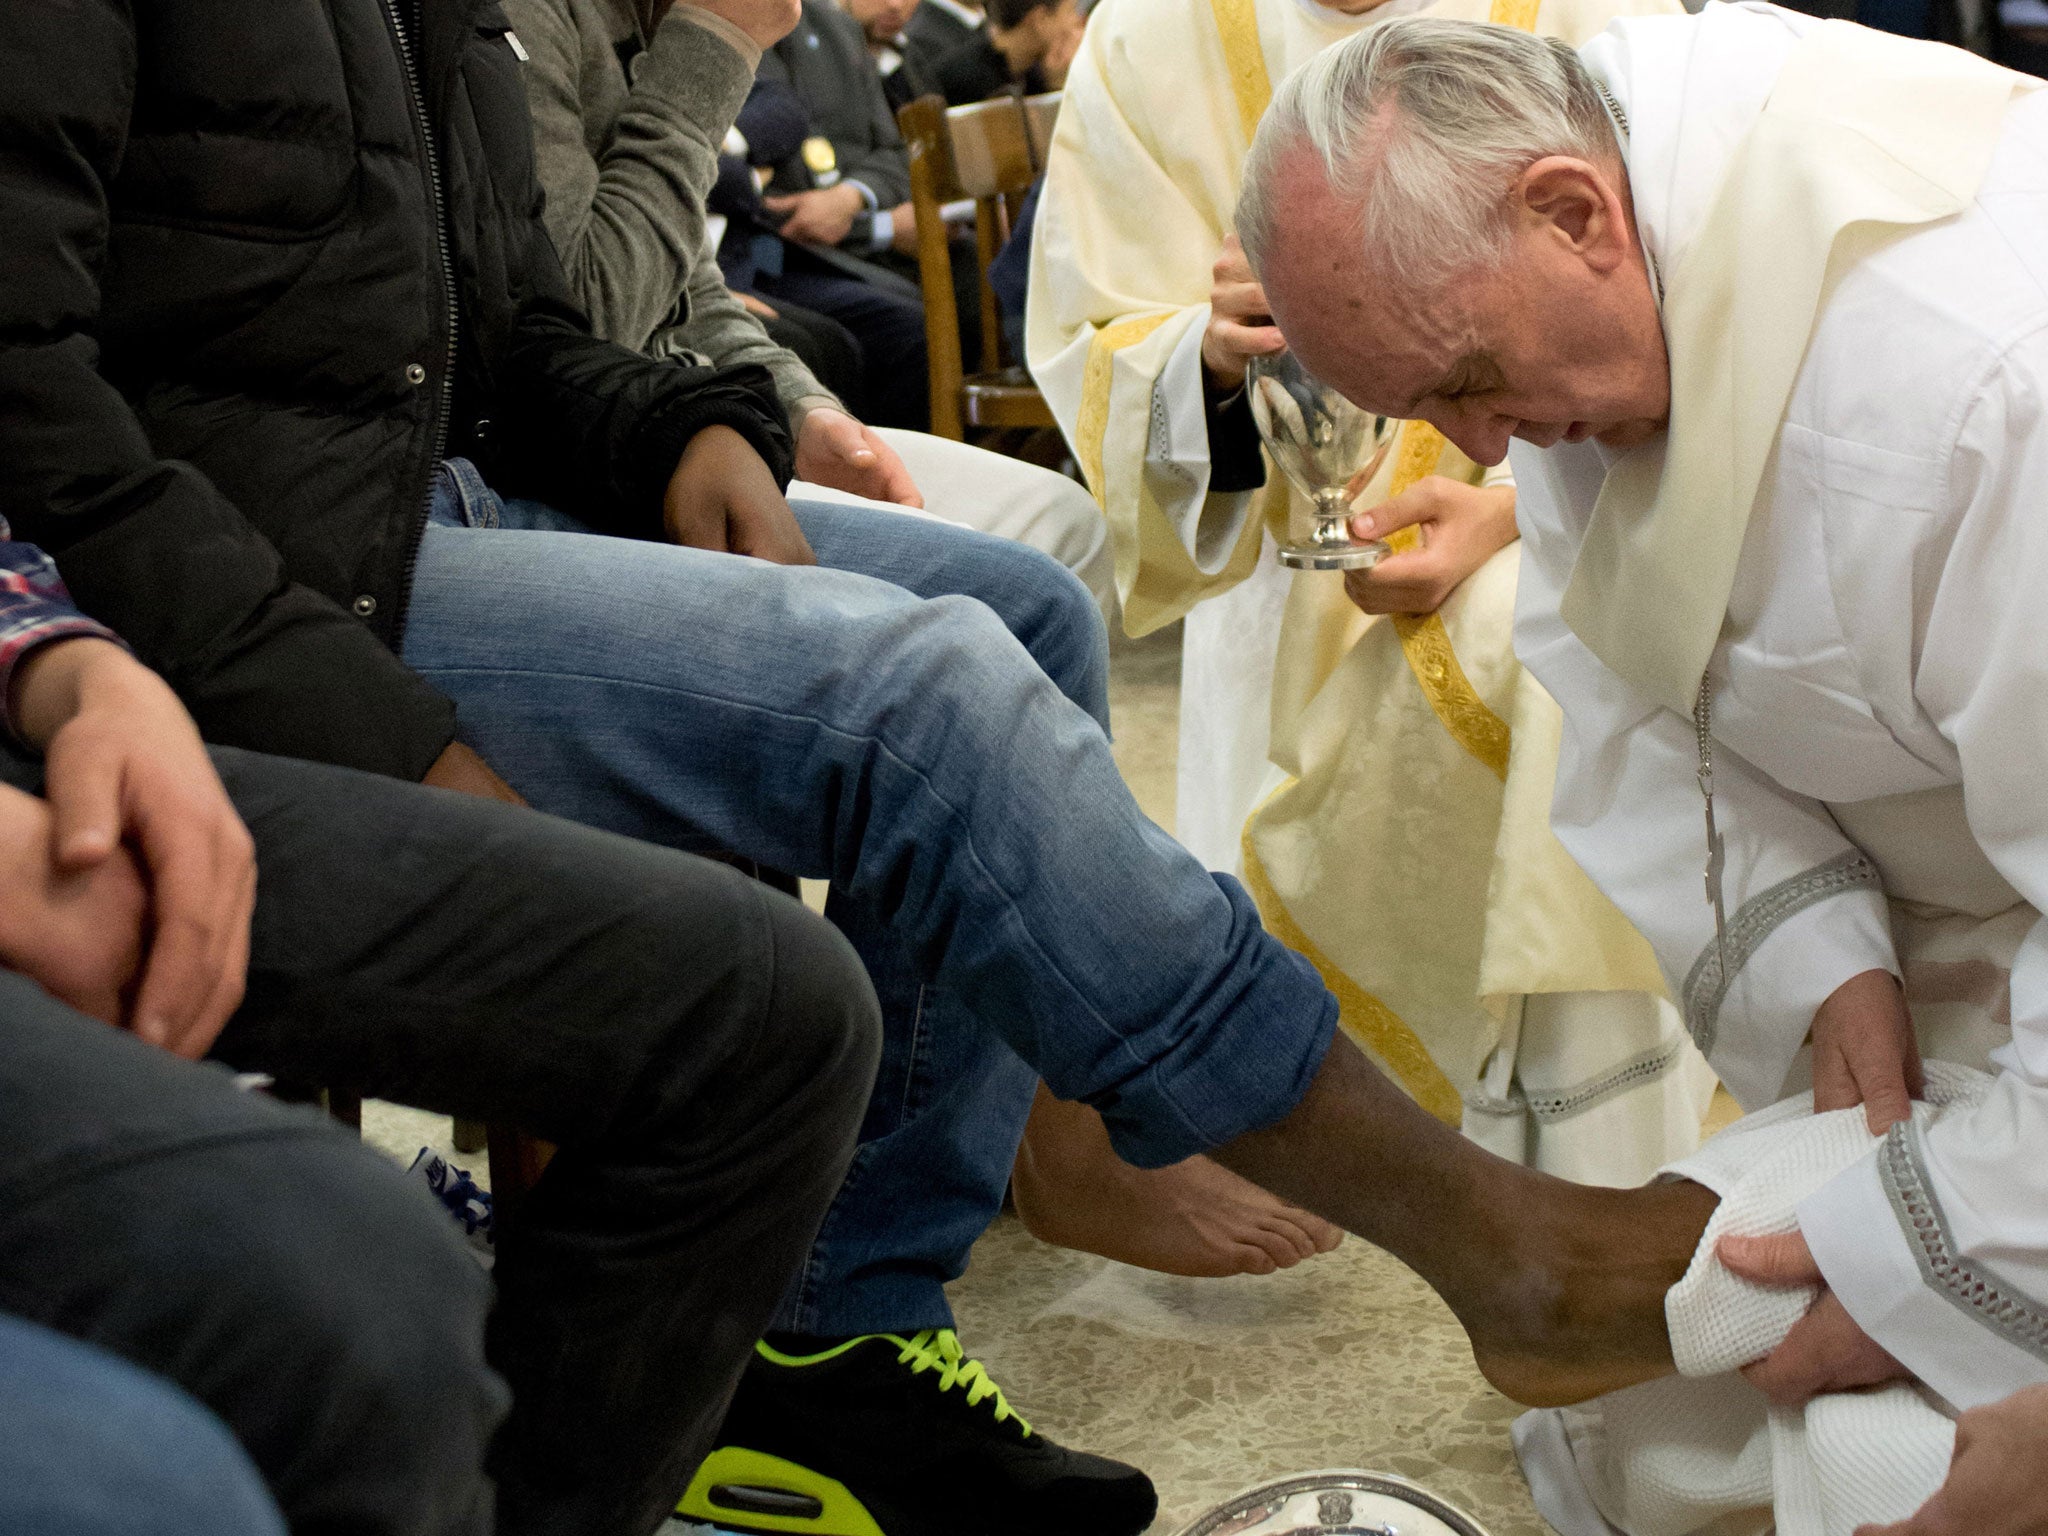 Pope Francis washes the feet of a prisoner at the Casal Del Marmo Youth Detention Centre